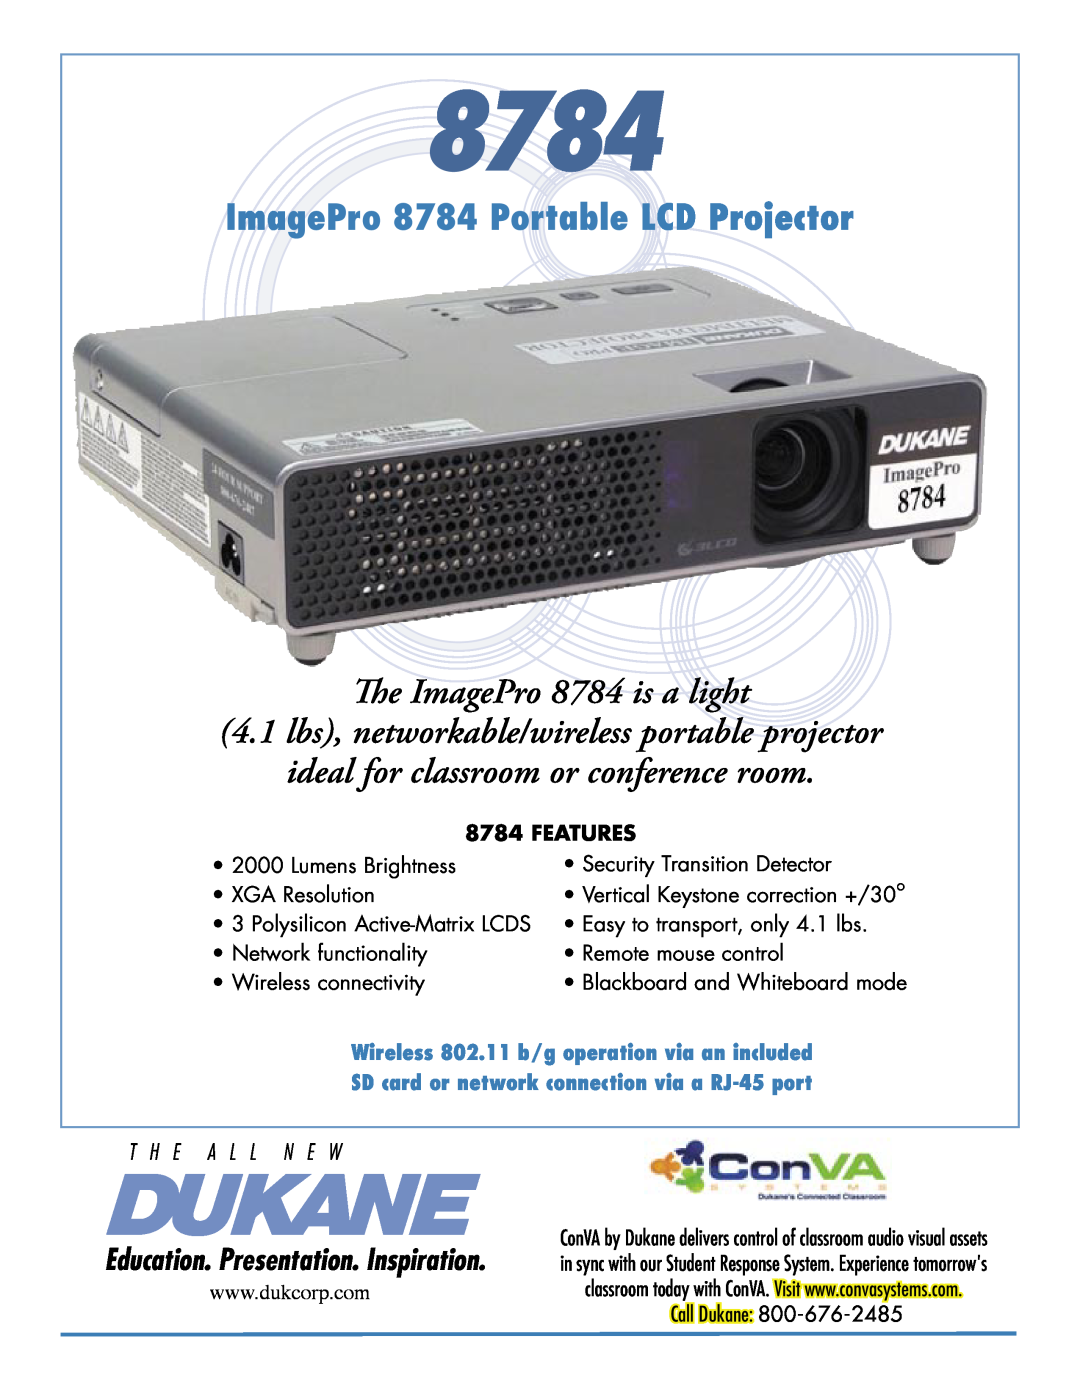 Dukane manual ImagePro 8784 Portable LCD Projector, The ImagePro 8784 is a light, Features 